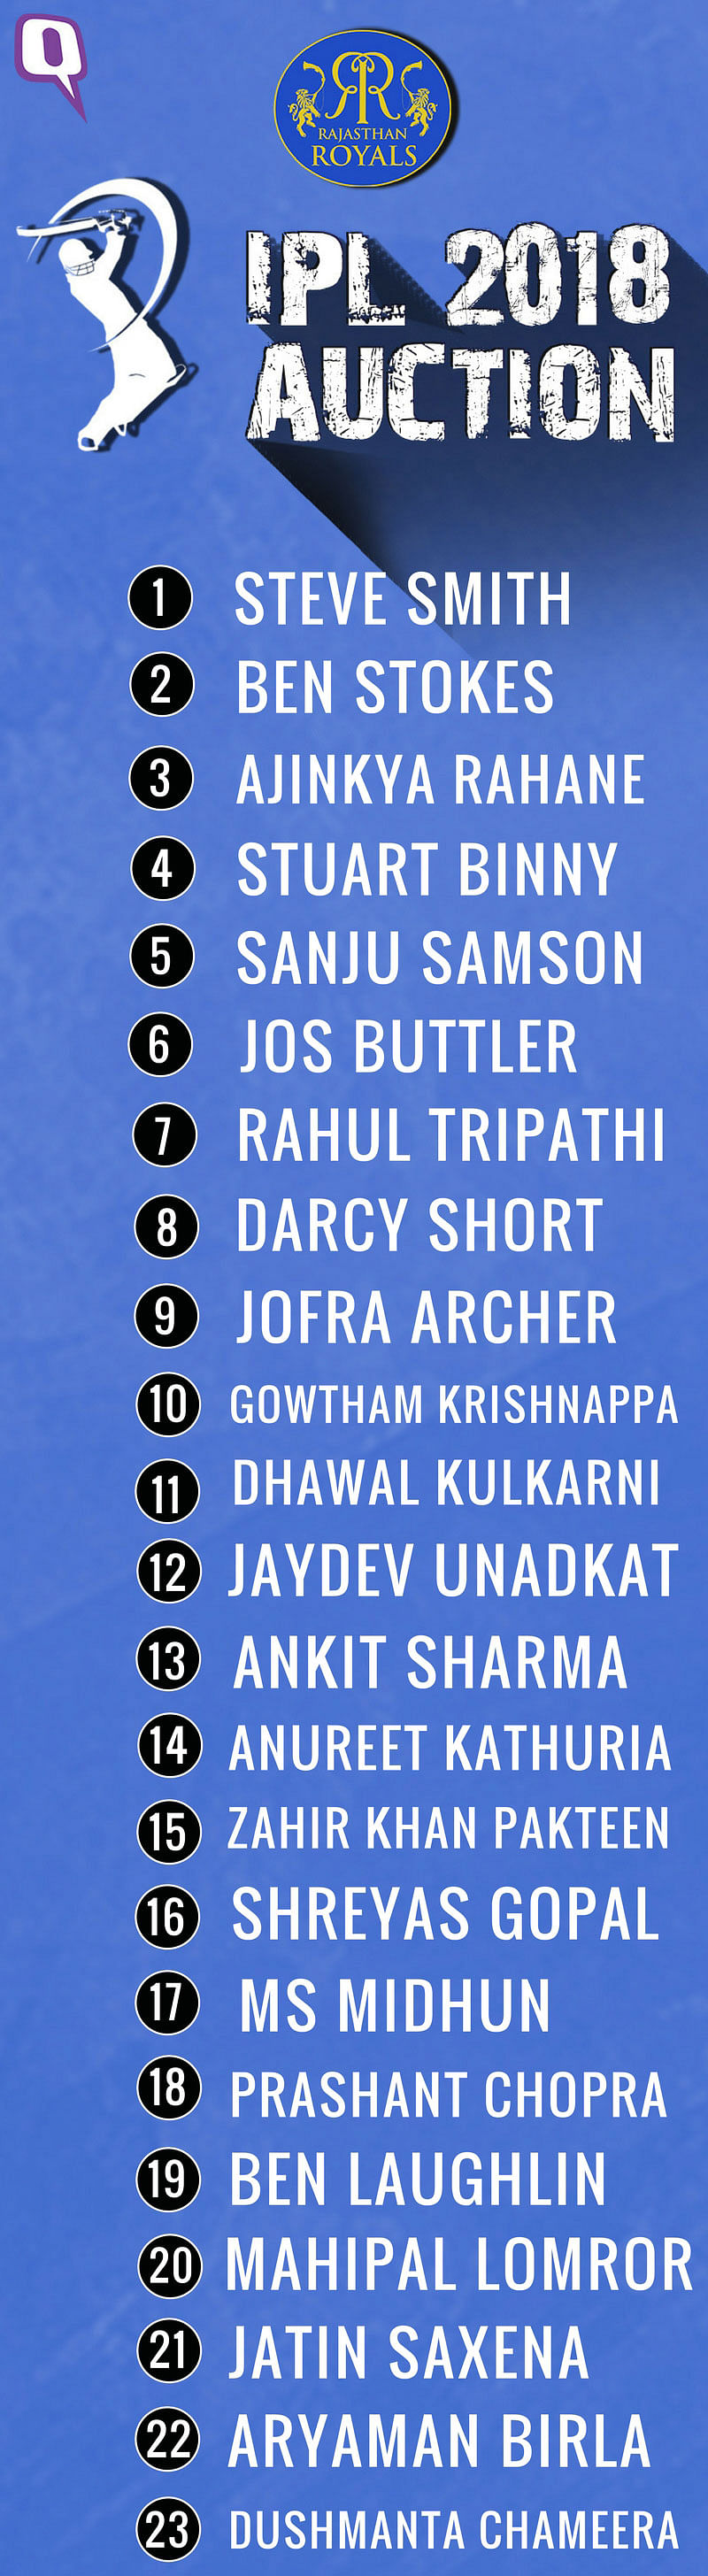 Here’s what Rajasthan Royals’ squad for IPL 2018 looks like so far.